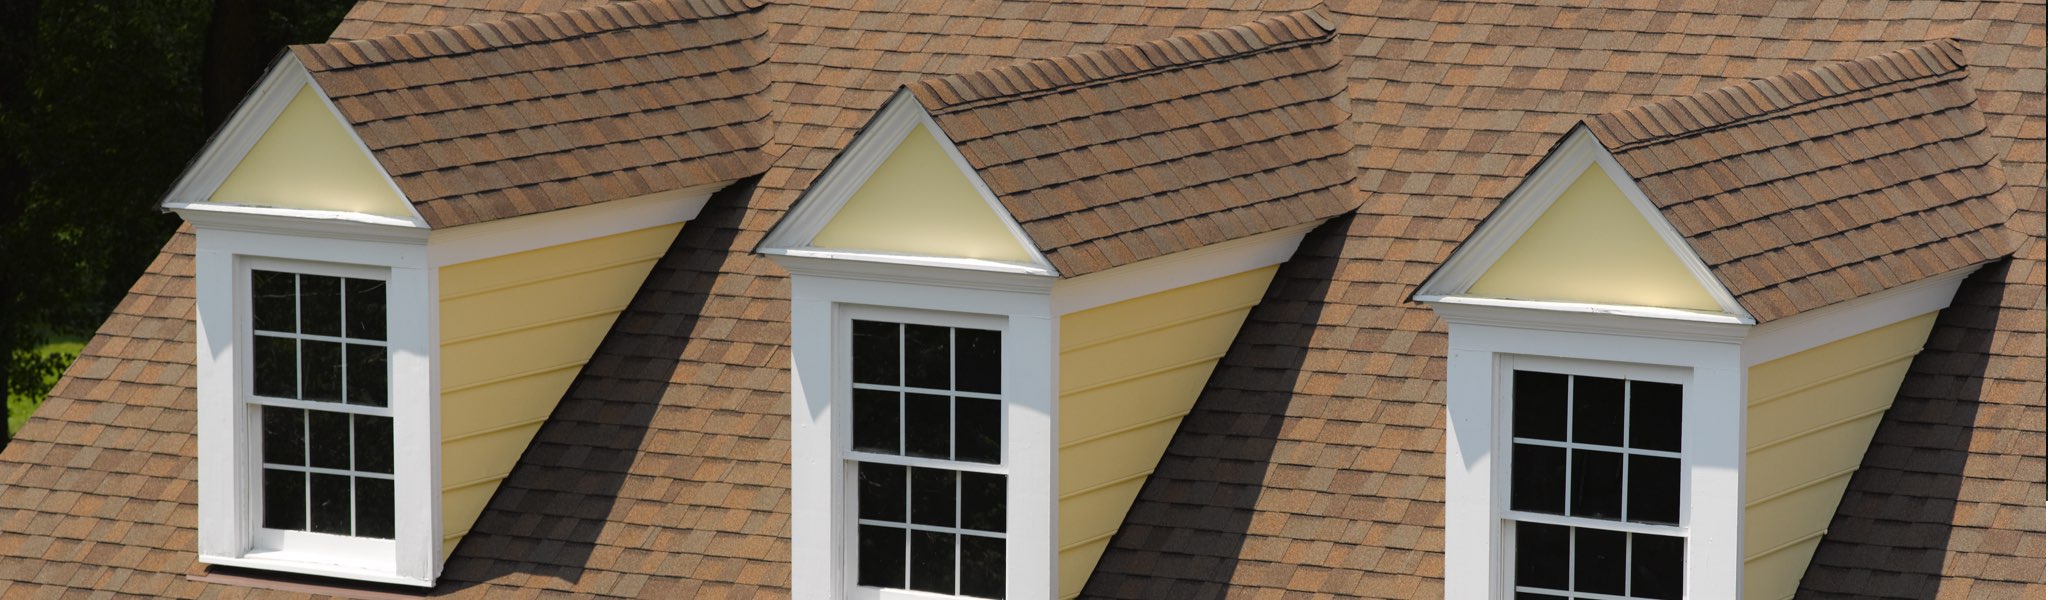 Town and Country Shingle Roof